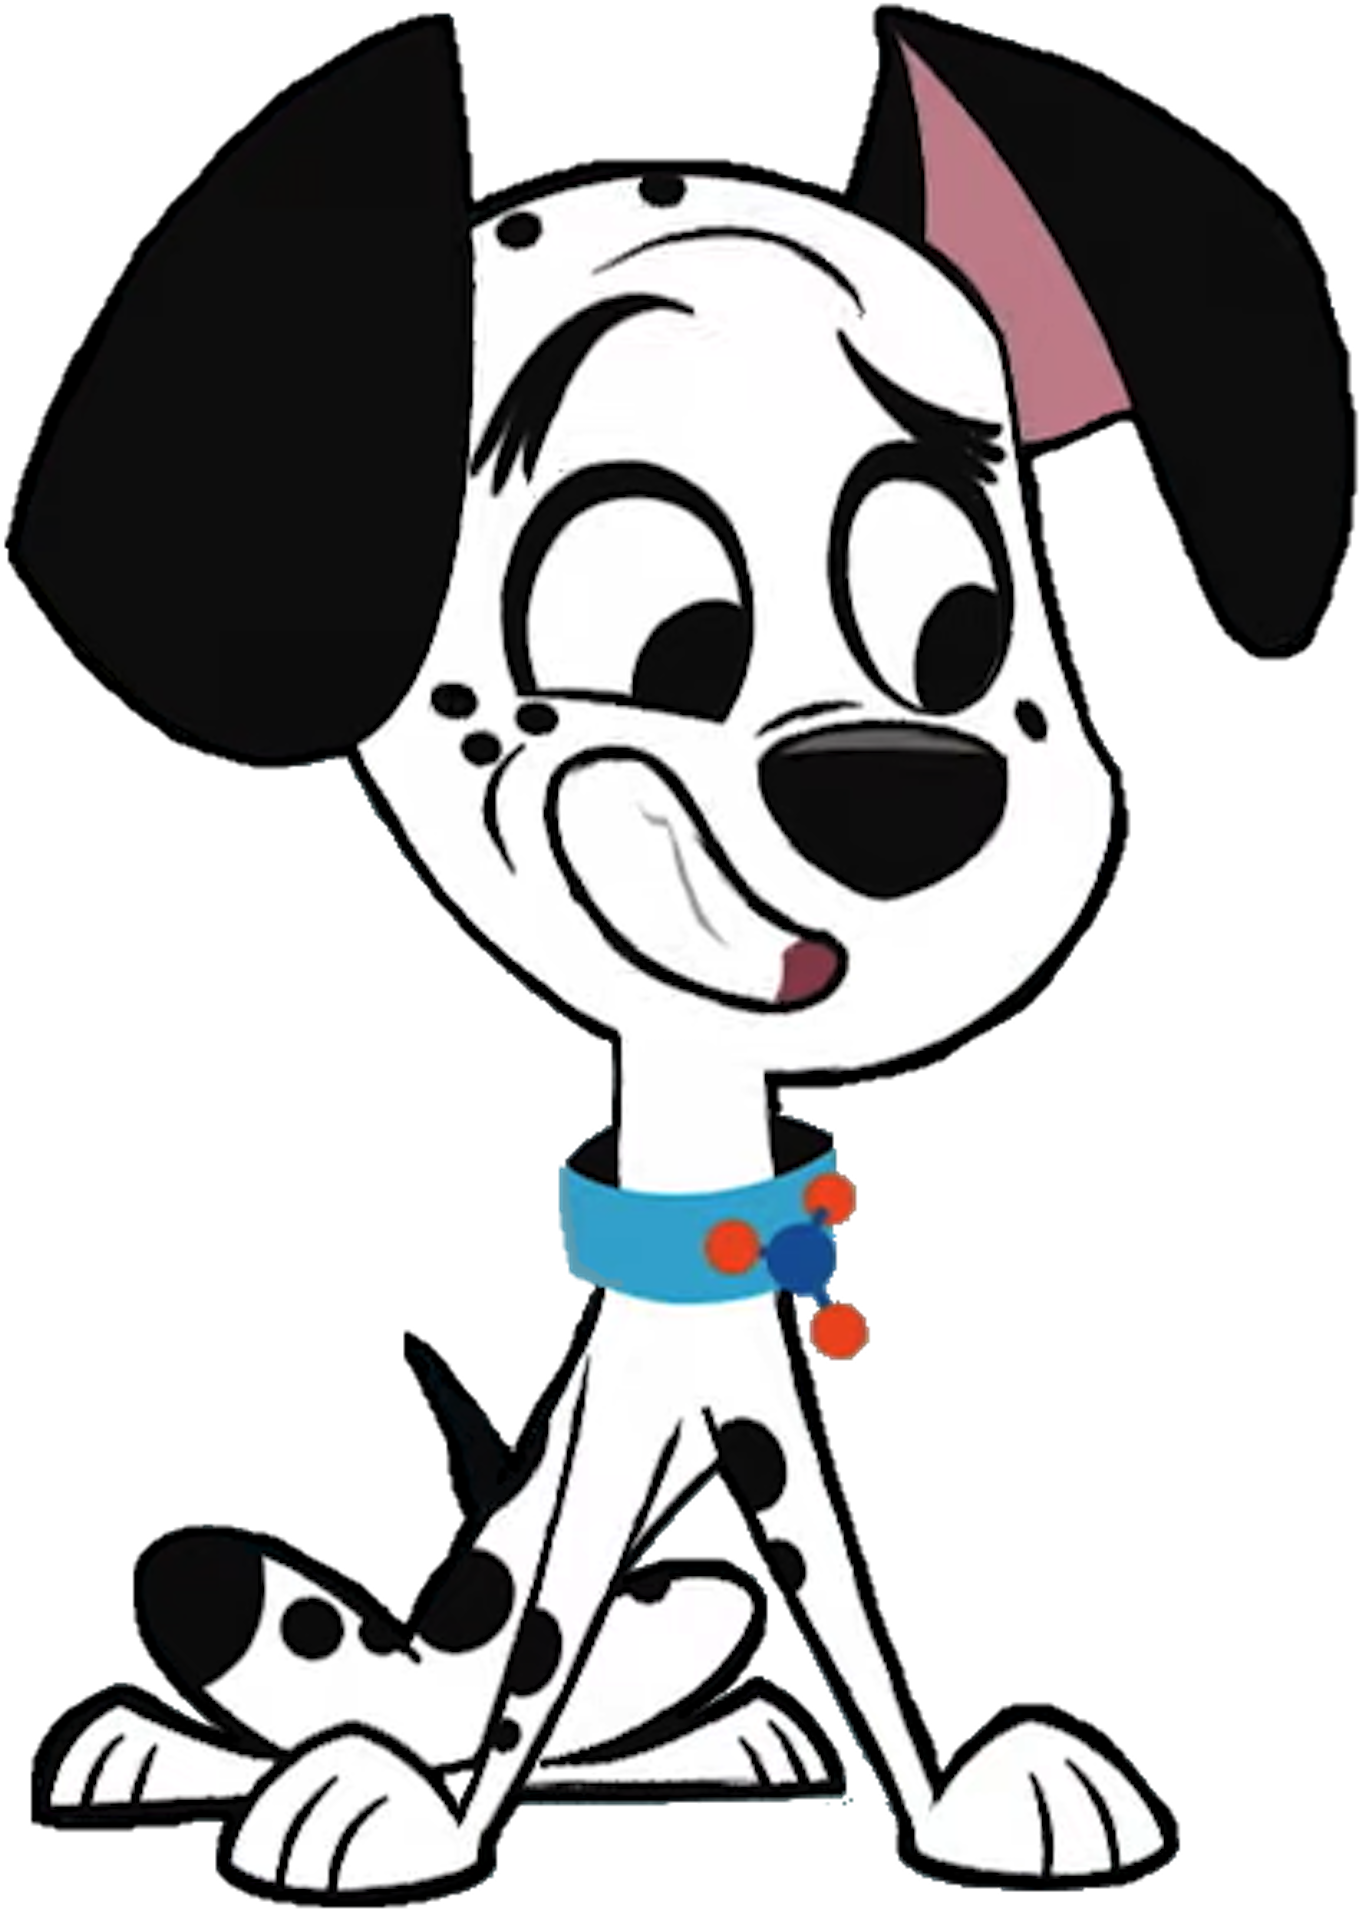 Animated Dalmatian Puppy Sitting PNG image